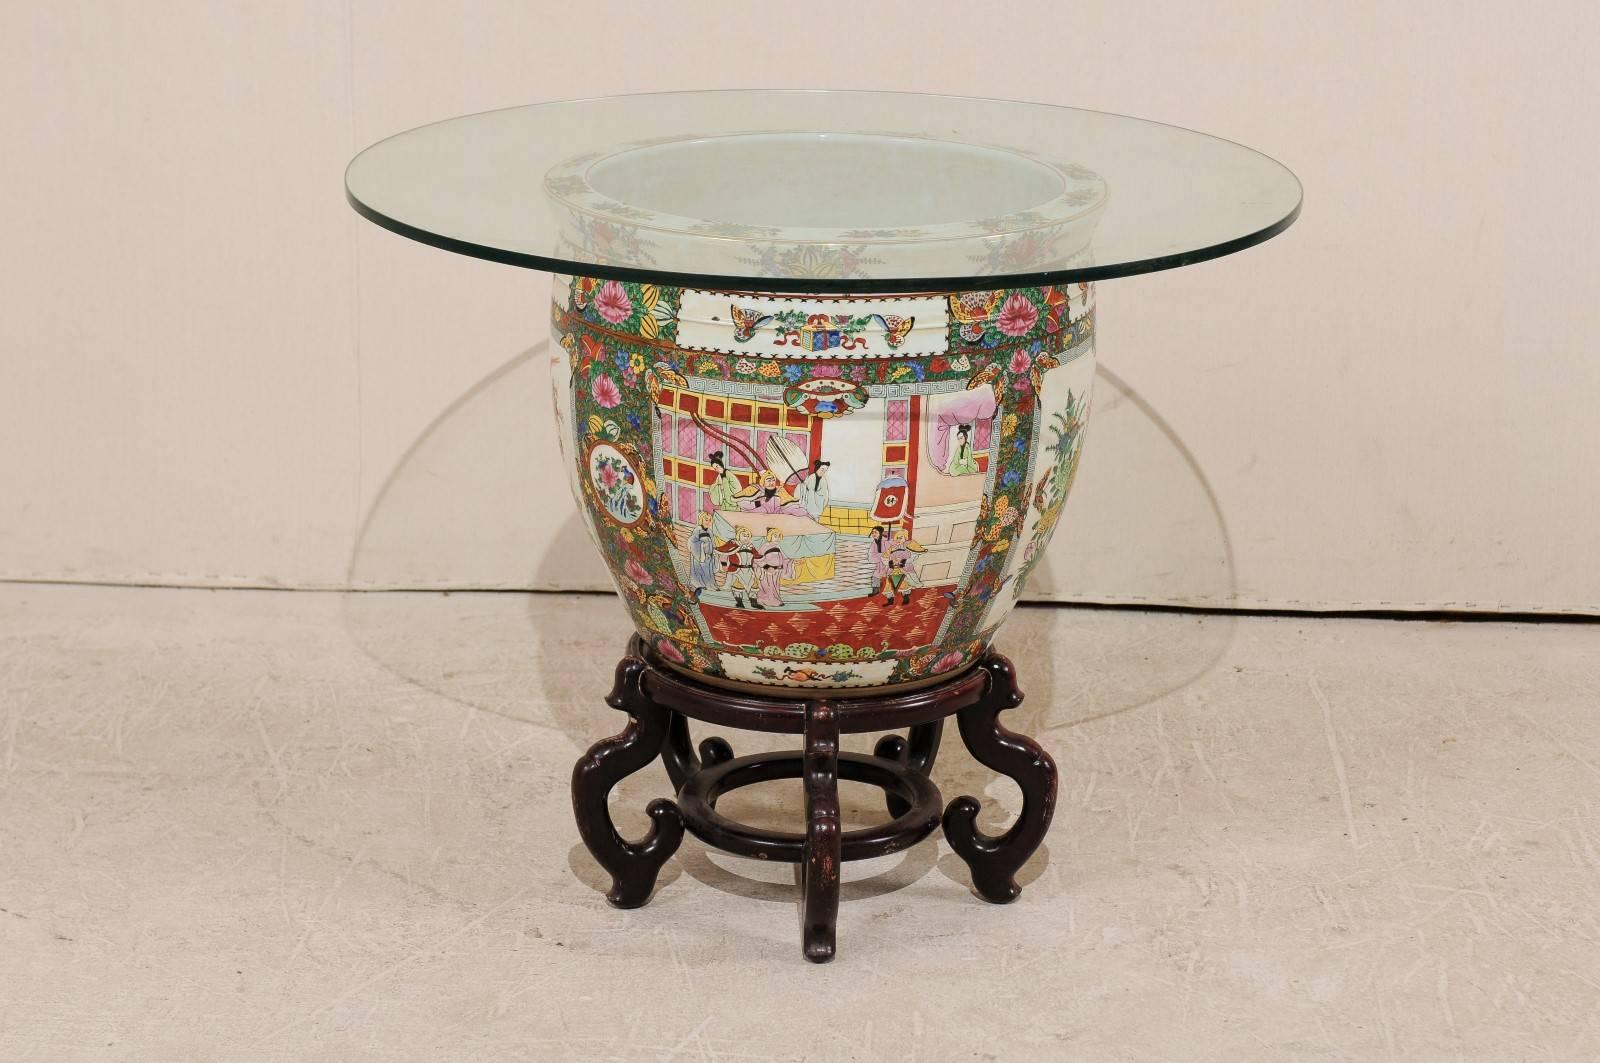 Painted Chinese Famille Rose Ornately Decorated Porcelain, Glass and Wood Round Table For Sale